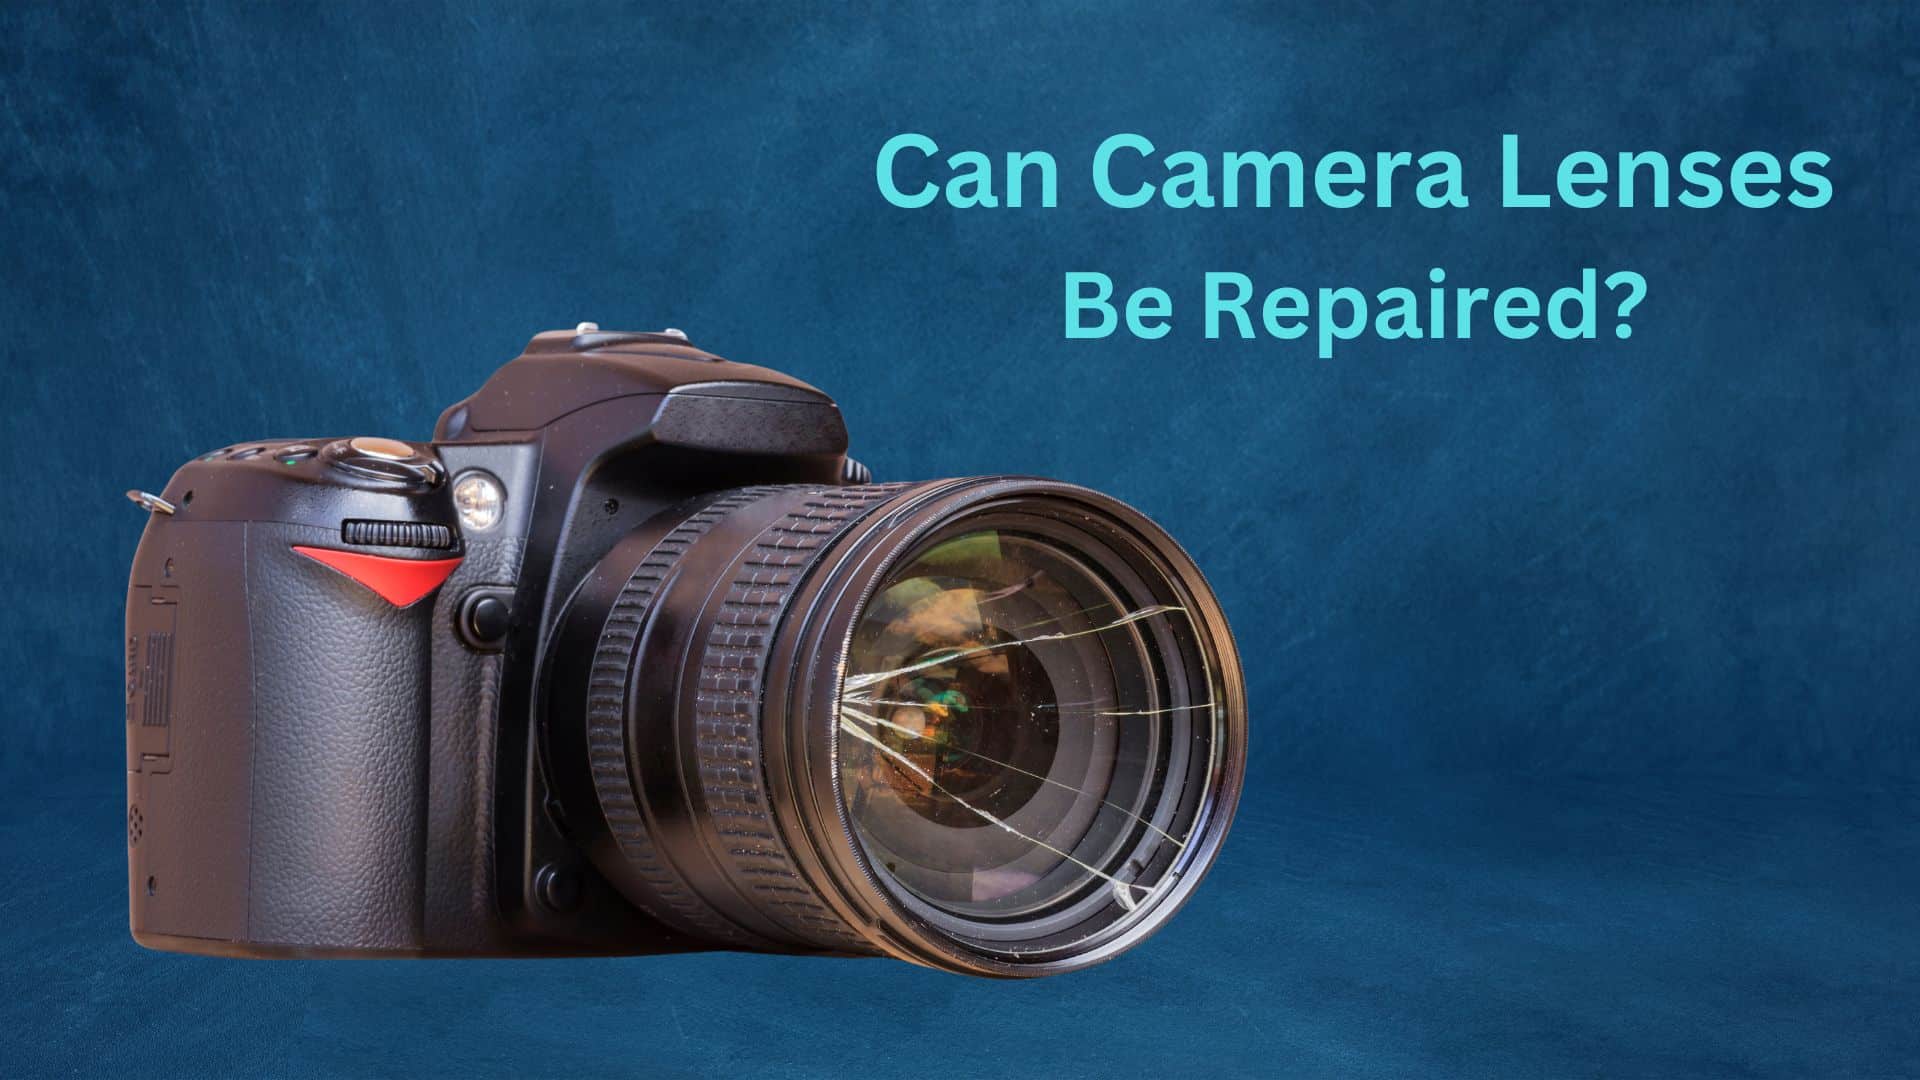 Can Camera Lenses Be Repaired